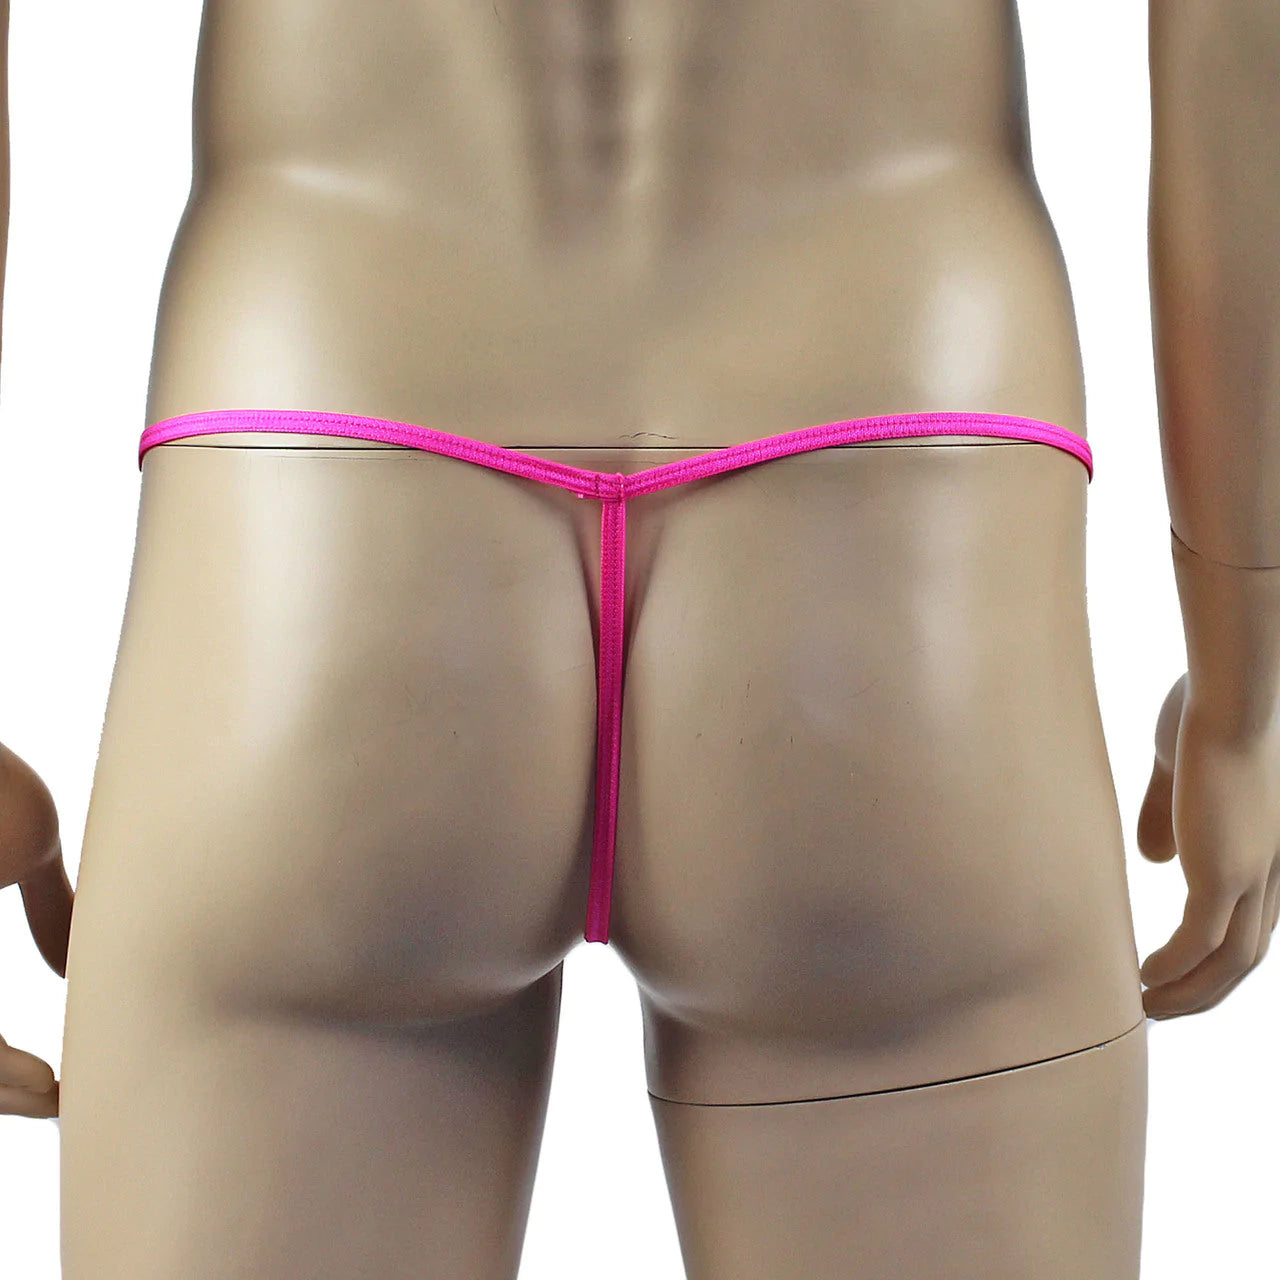 SALE - Mens Mick Keep It Simple Spandex Pouch G string with Thin Elastic Hot Pink